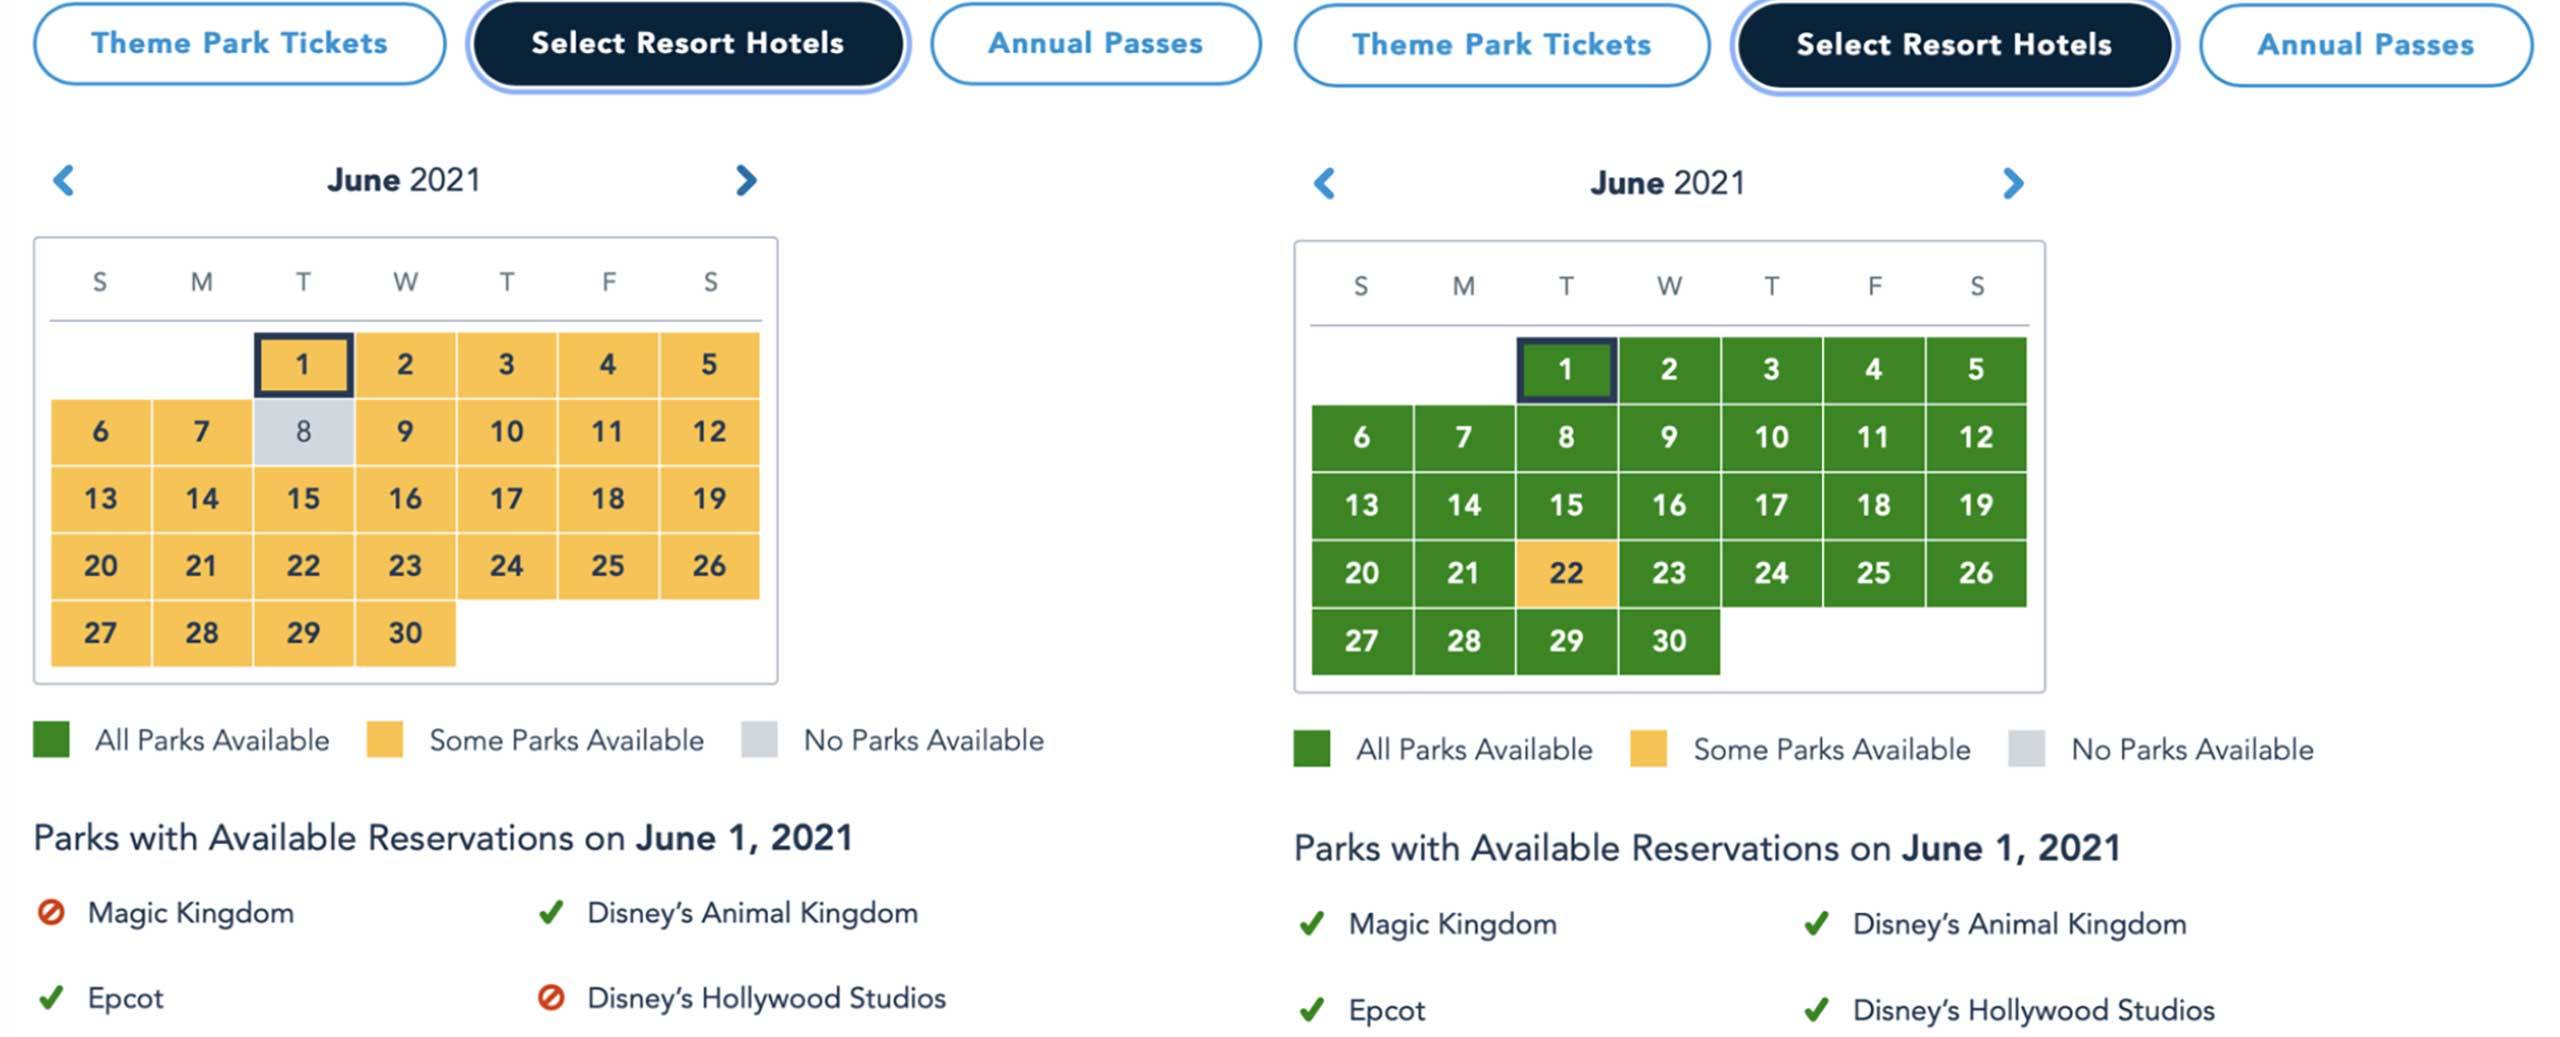 Disney World Park Pass availability greatly expanded for June 2021